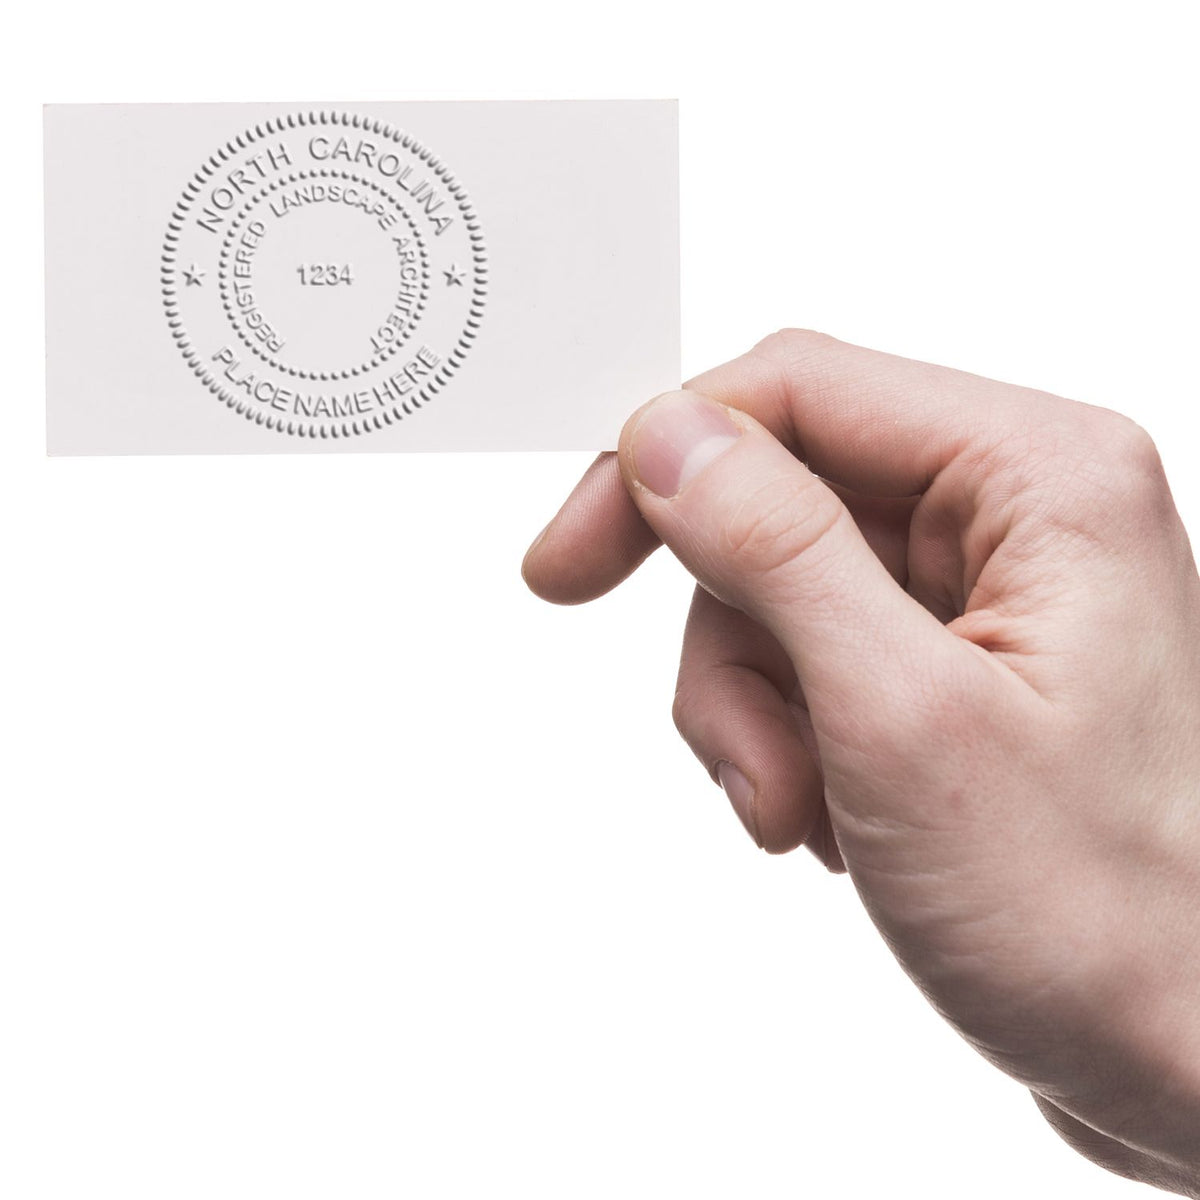 An in use photo of the Gift North Carolina Landscape Architect Seal showing a sample imprint on a cardstock